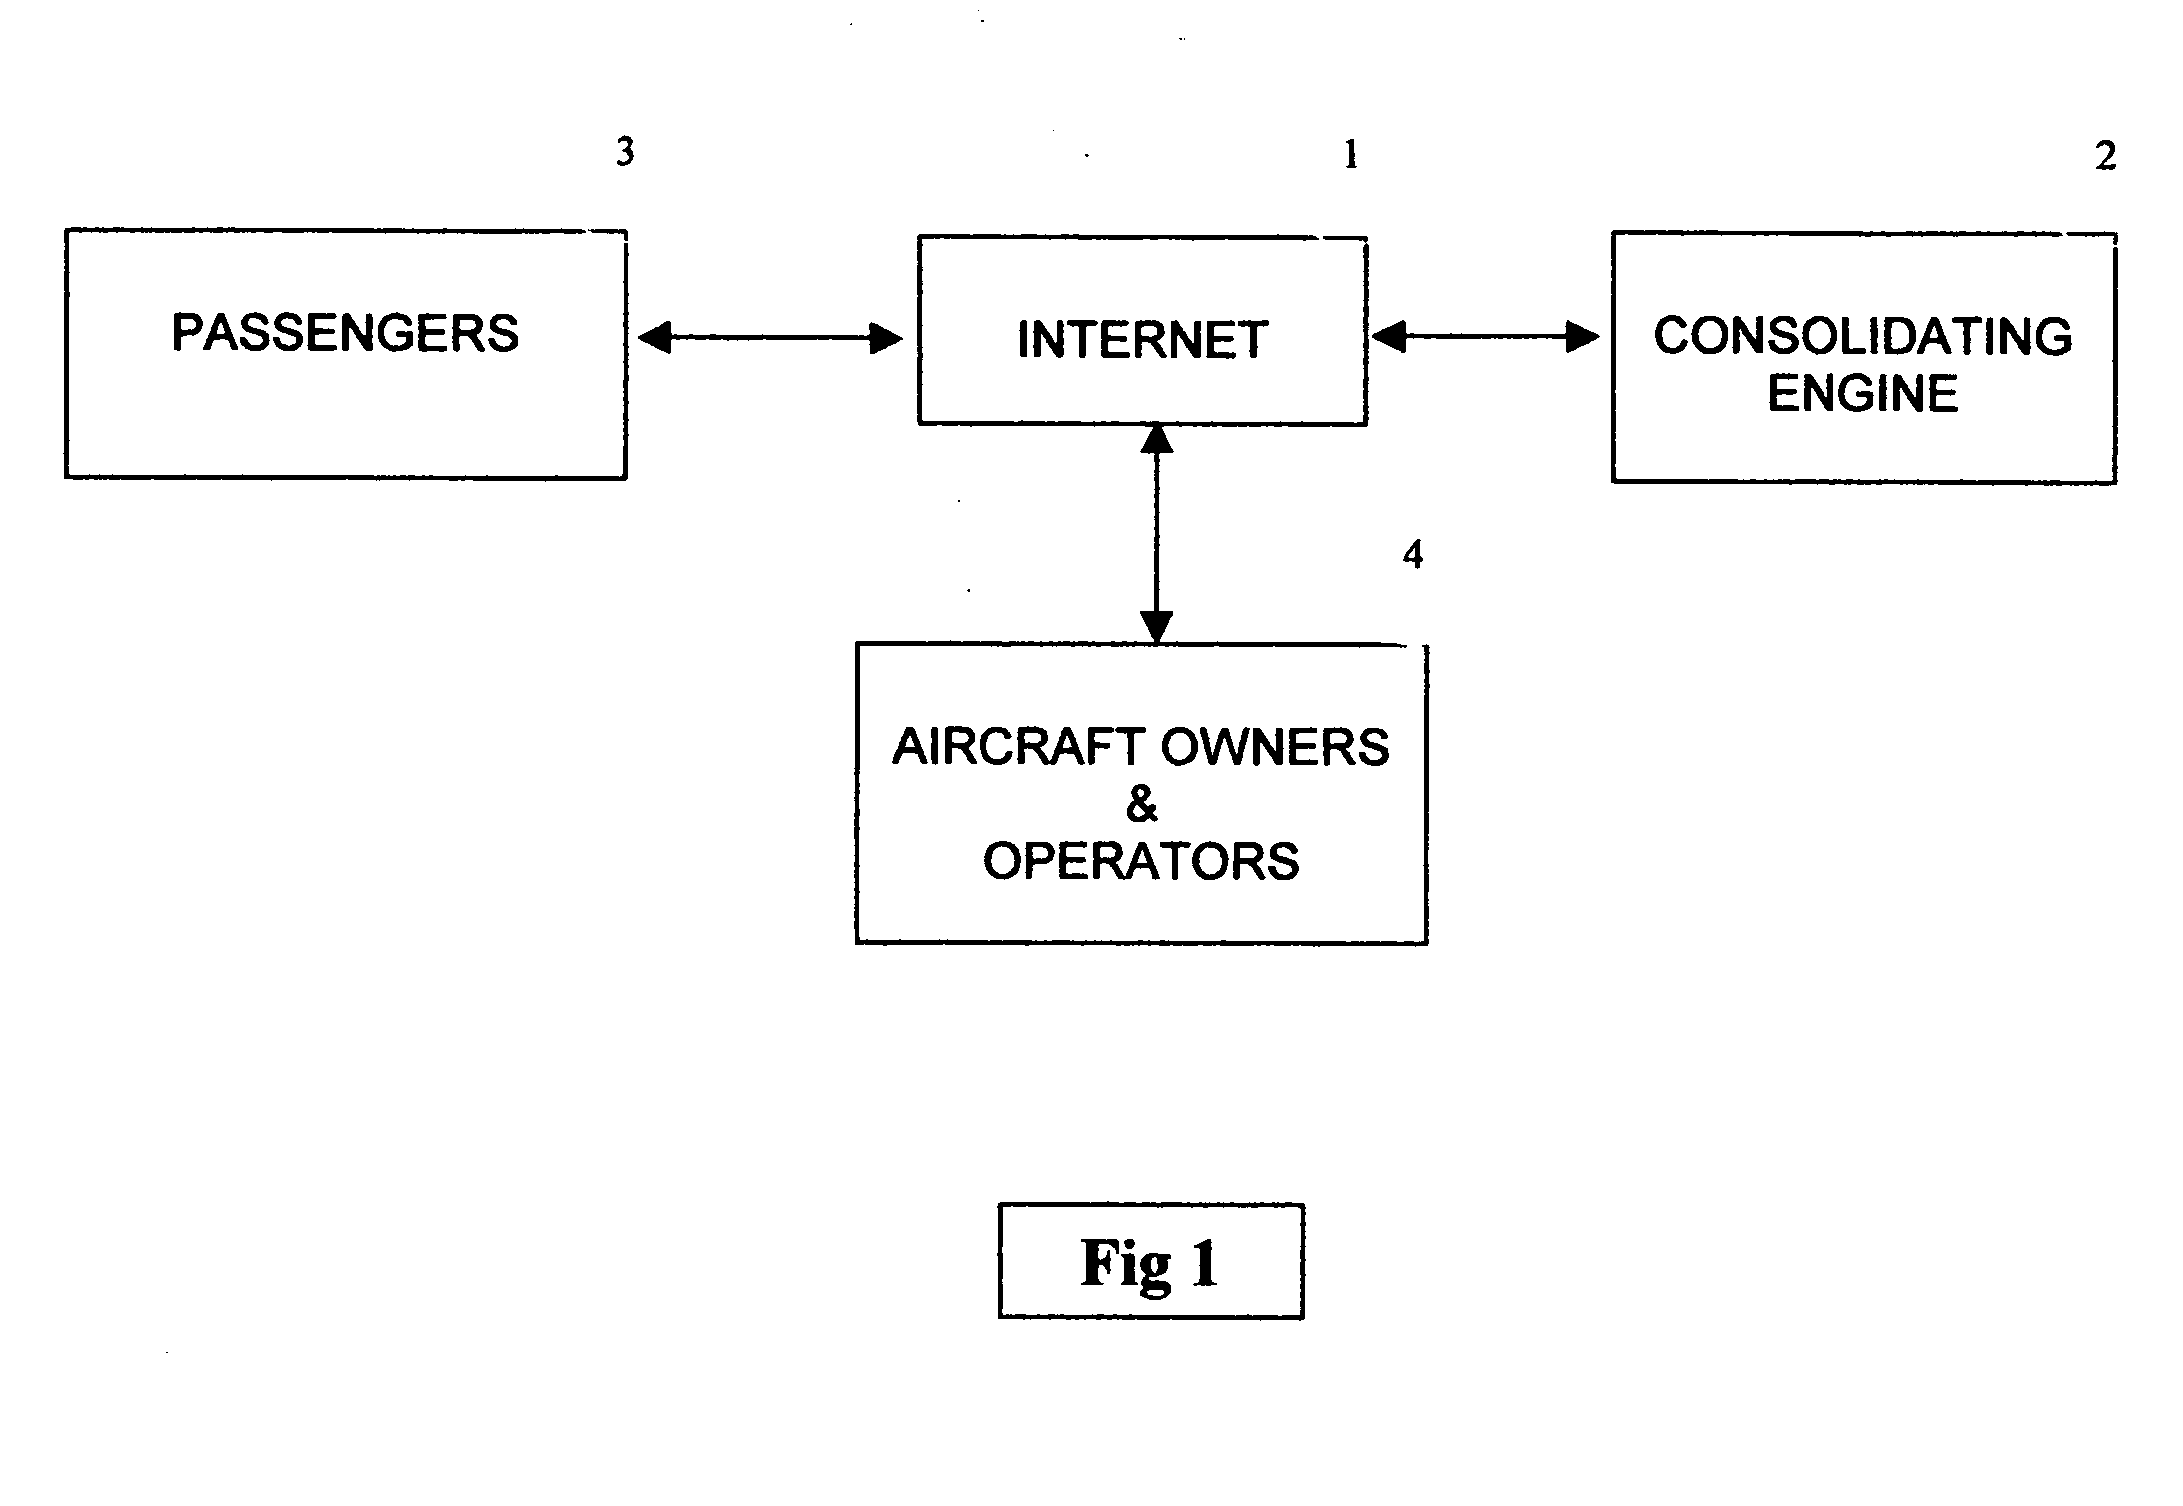 Consolidating engine for passengers of private aircraft